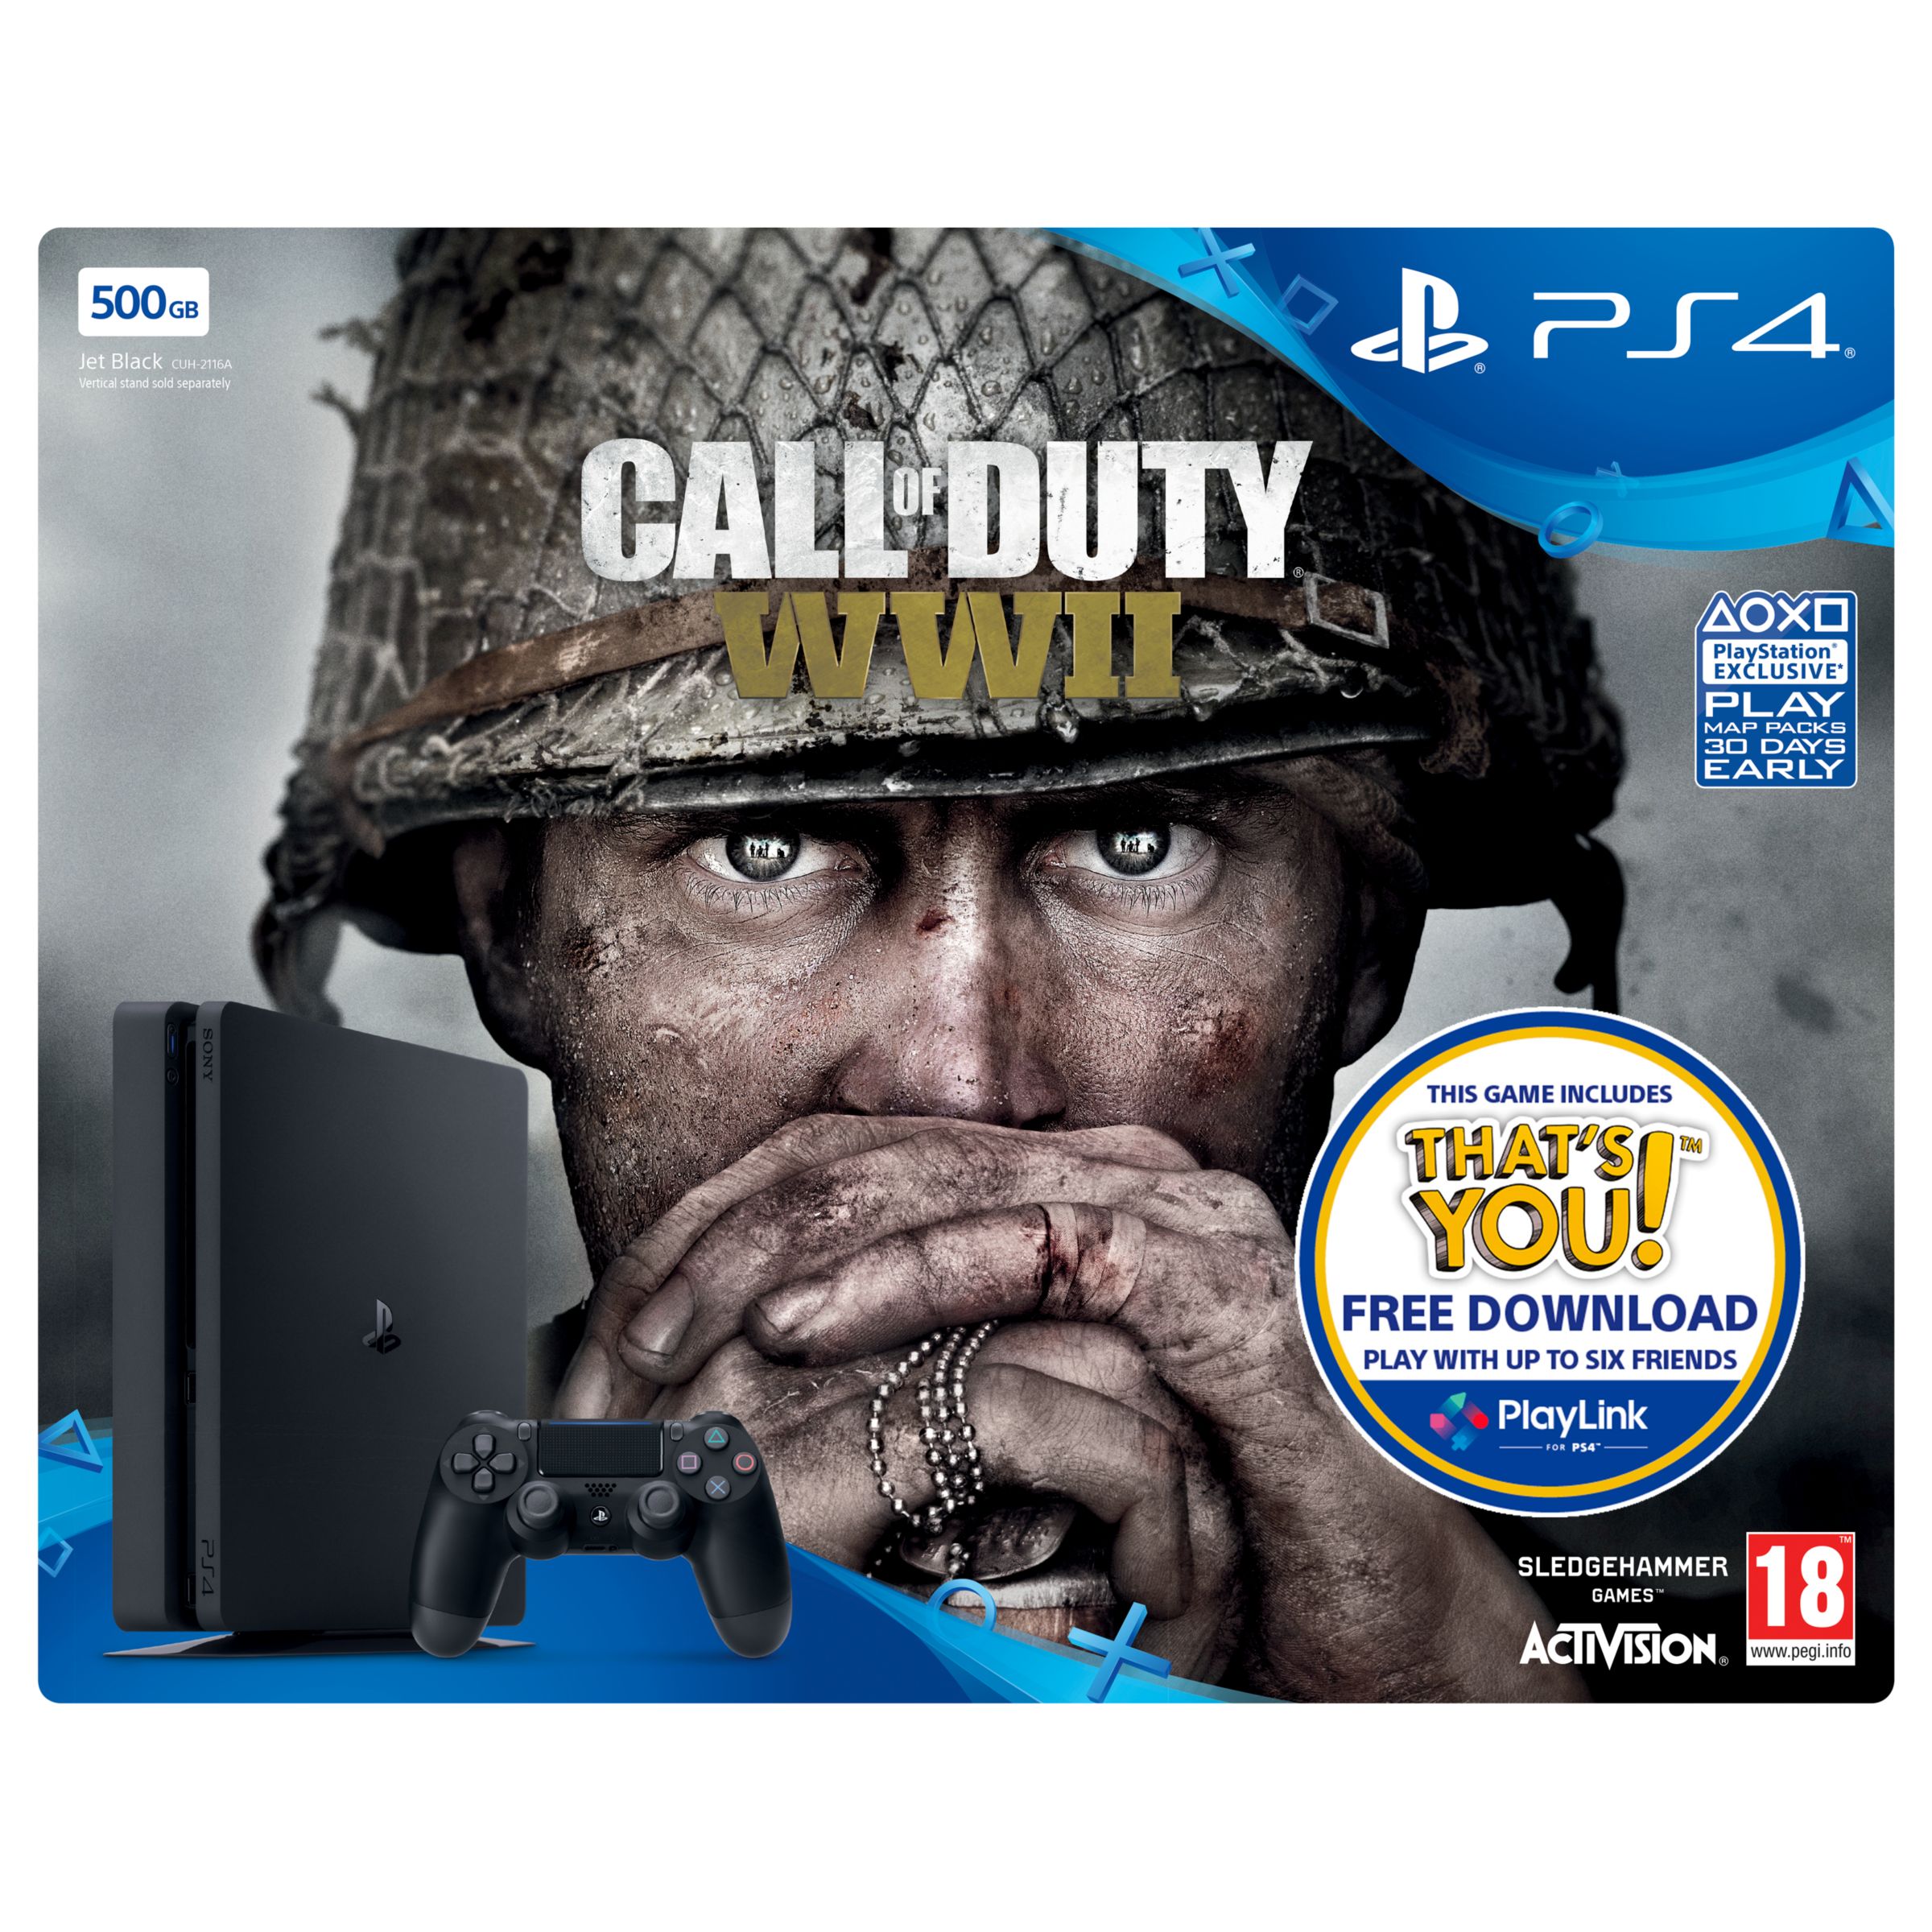 serie Gæstfrihed på en ferie Sony PlayStation 4 Slim Console, 500GB, DualShock 4 Controller and Call of  Duty: WWII game, with free That's You! game download code